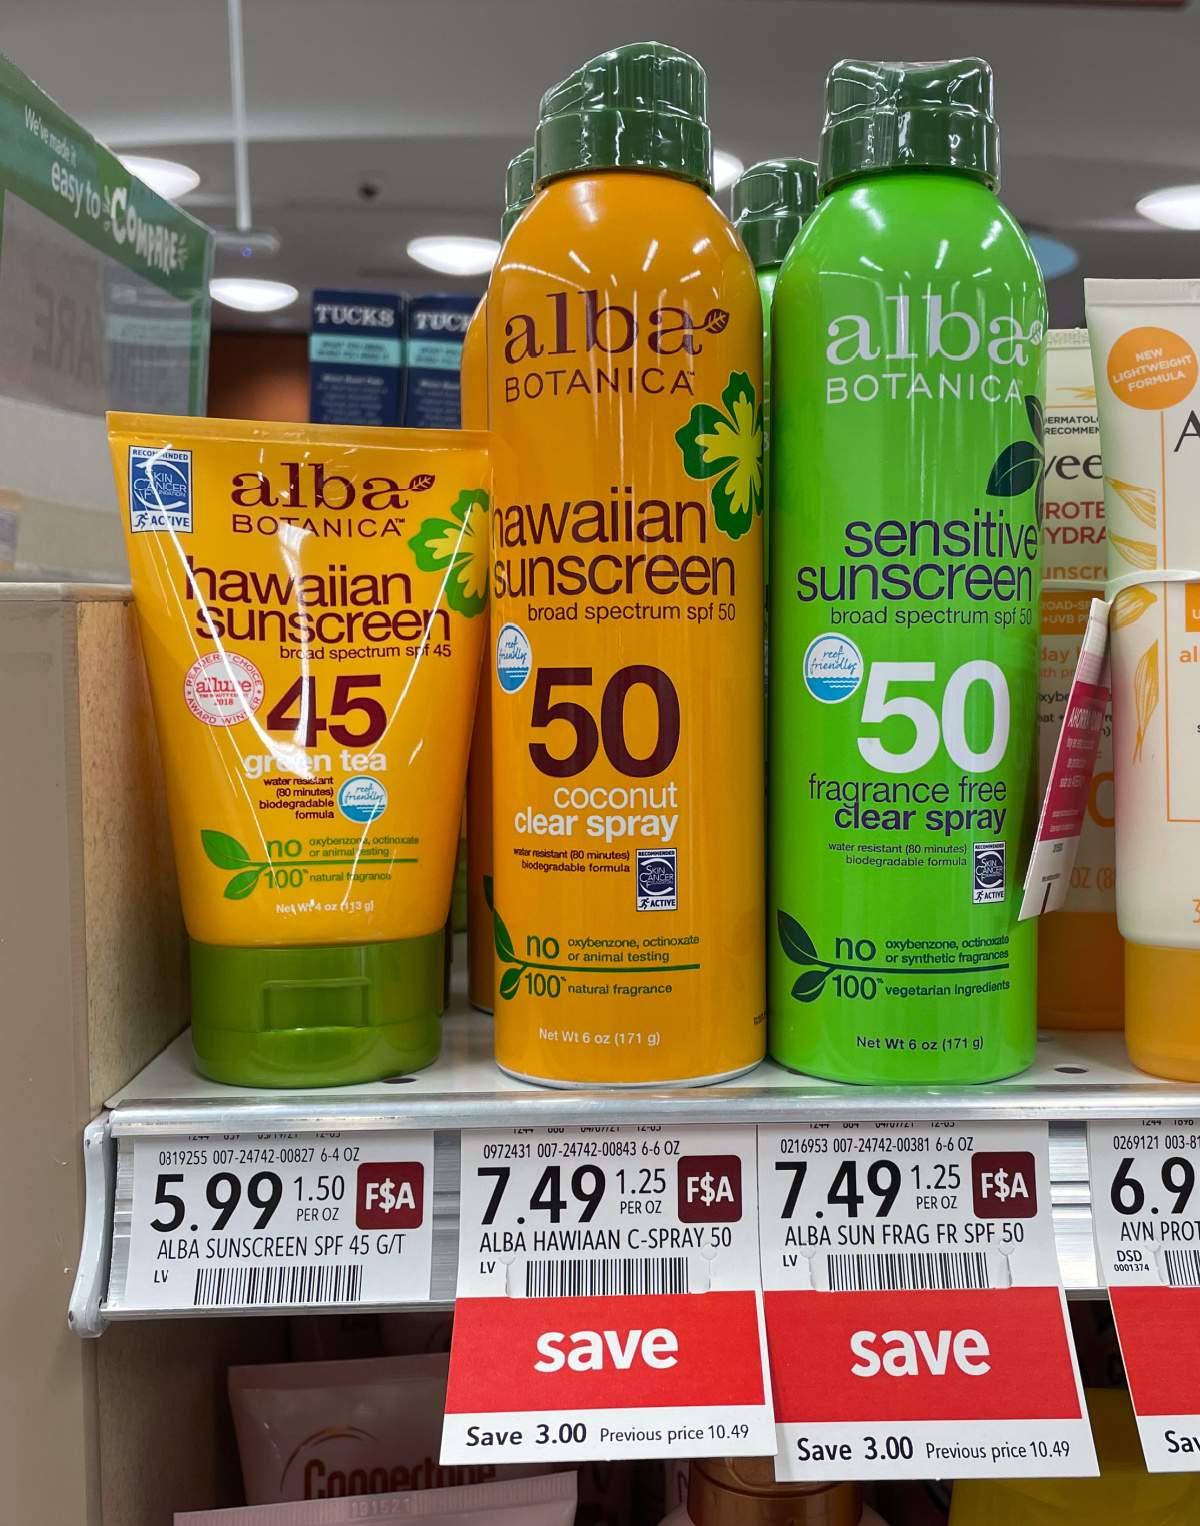 Stock Up On Fantastic Sunscreen And Save - Alba Botanica Is On Sale Now At Publix on I Heart Publix